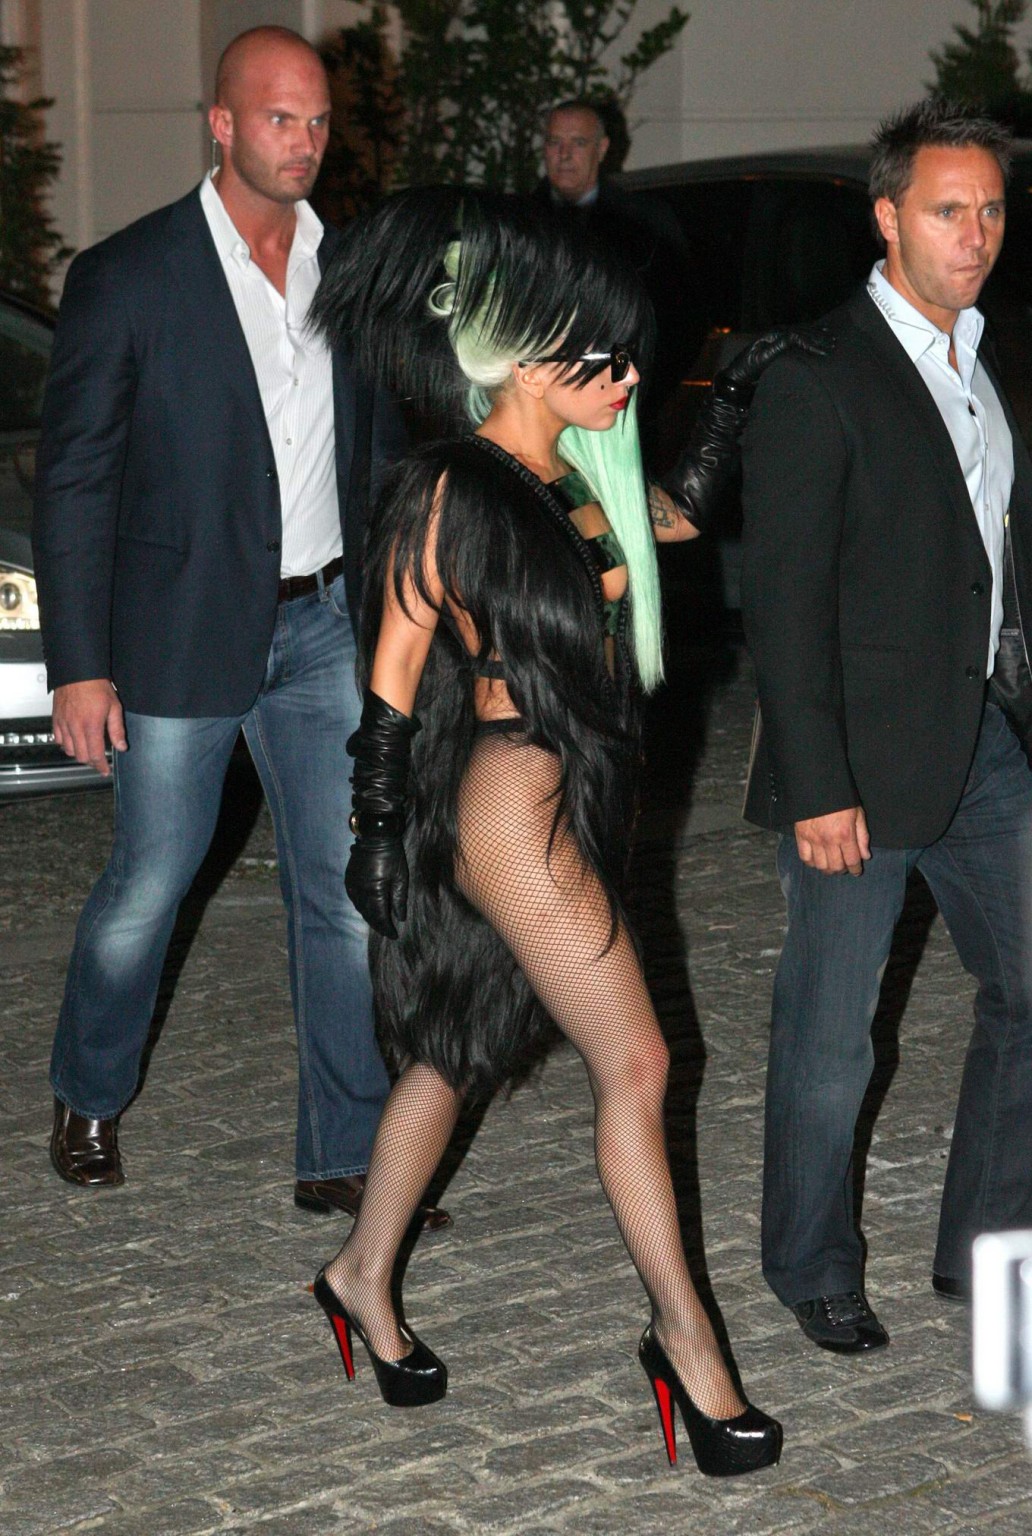 Lady Gaga sighting in London wearing skimpy outfit #75286142